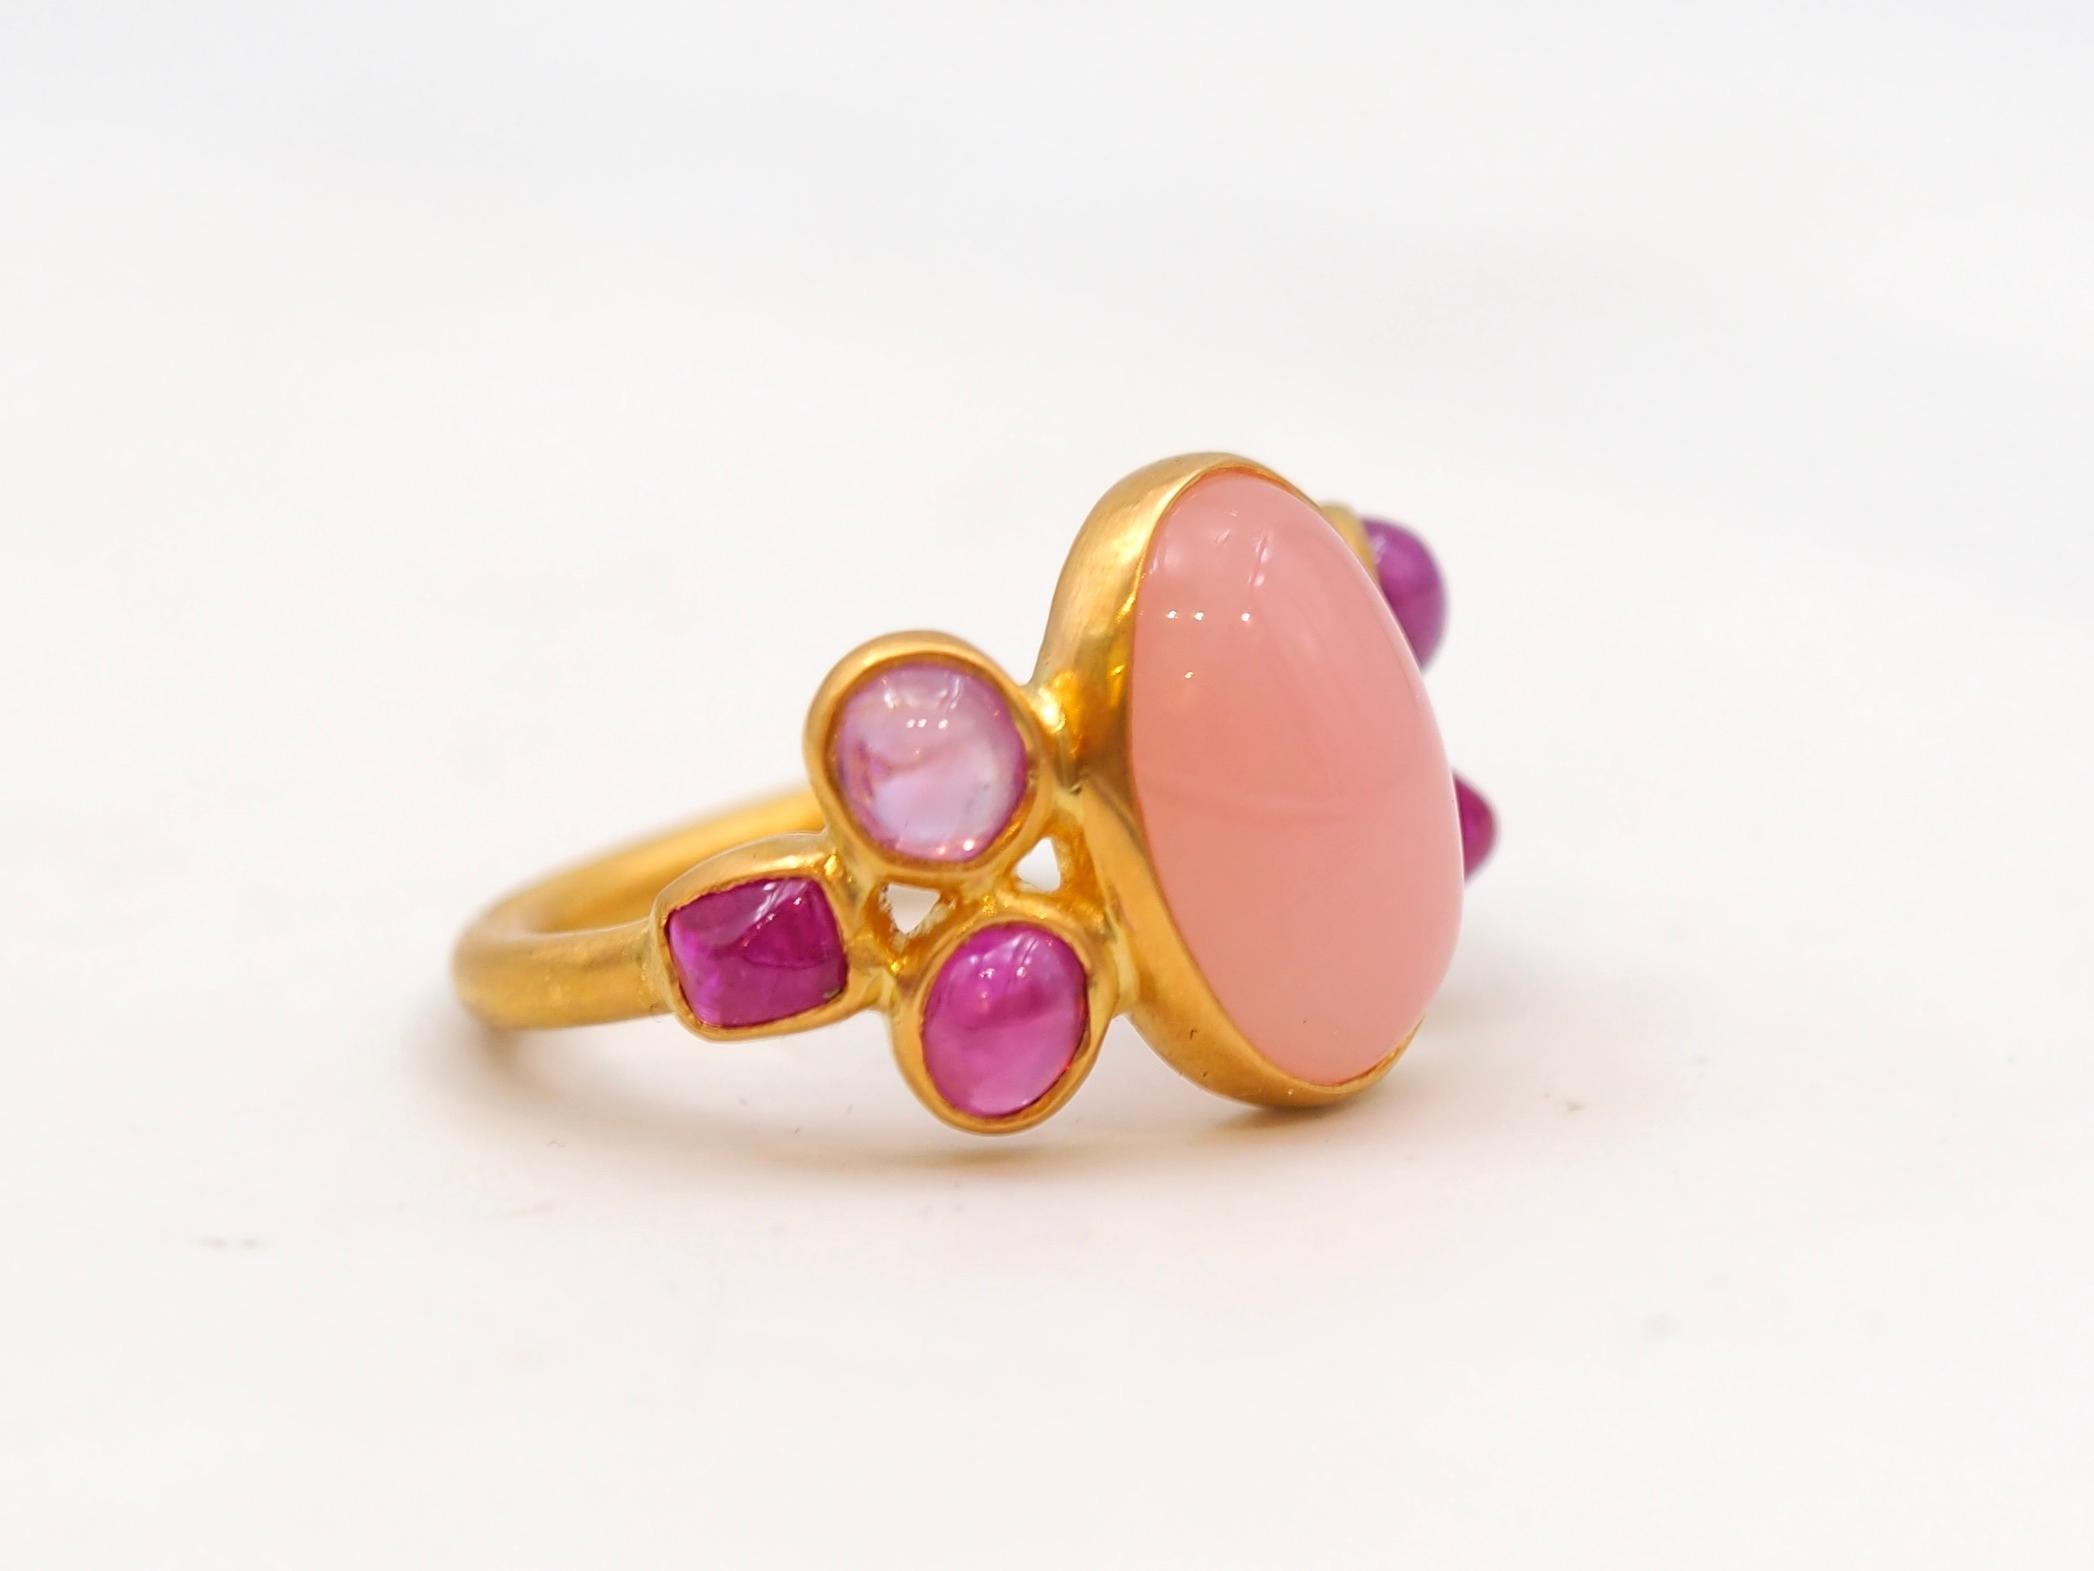 Scrives 5.25 Ct Peach Chalcedony 3.06 Ct Pink sapphire Cabochon 22 Kt Gold Ring For Sale 3